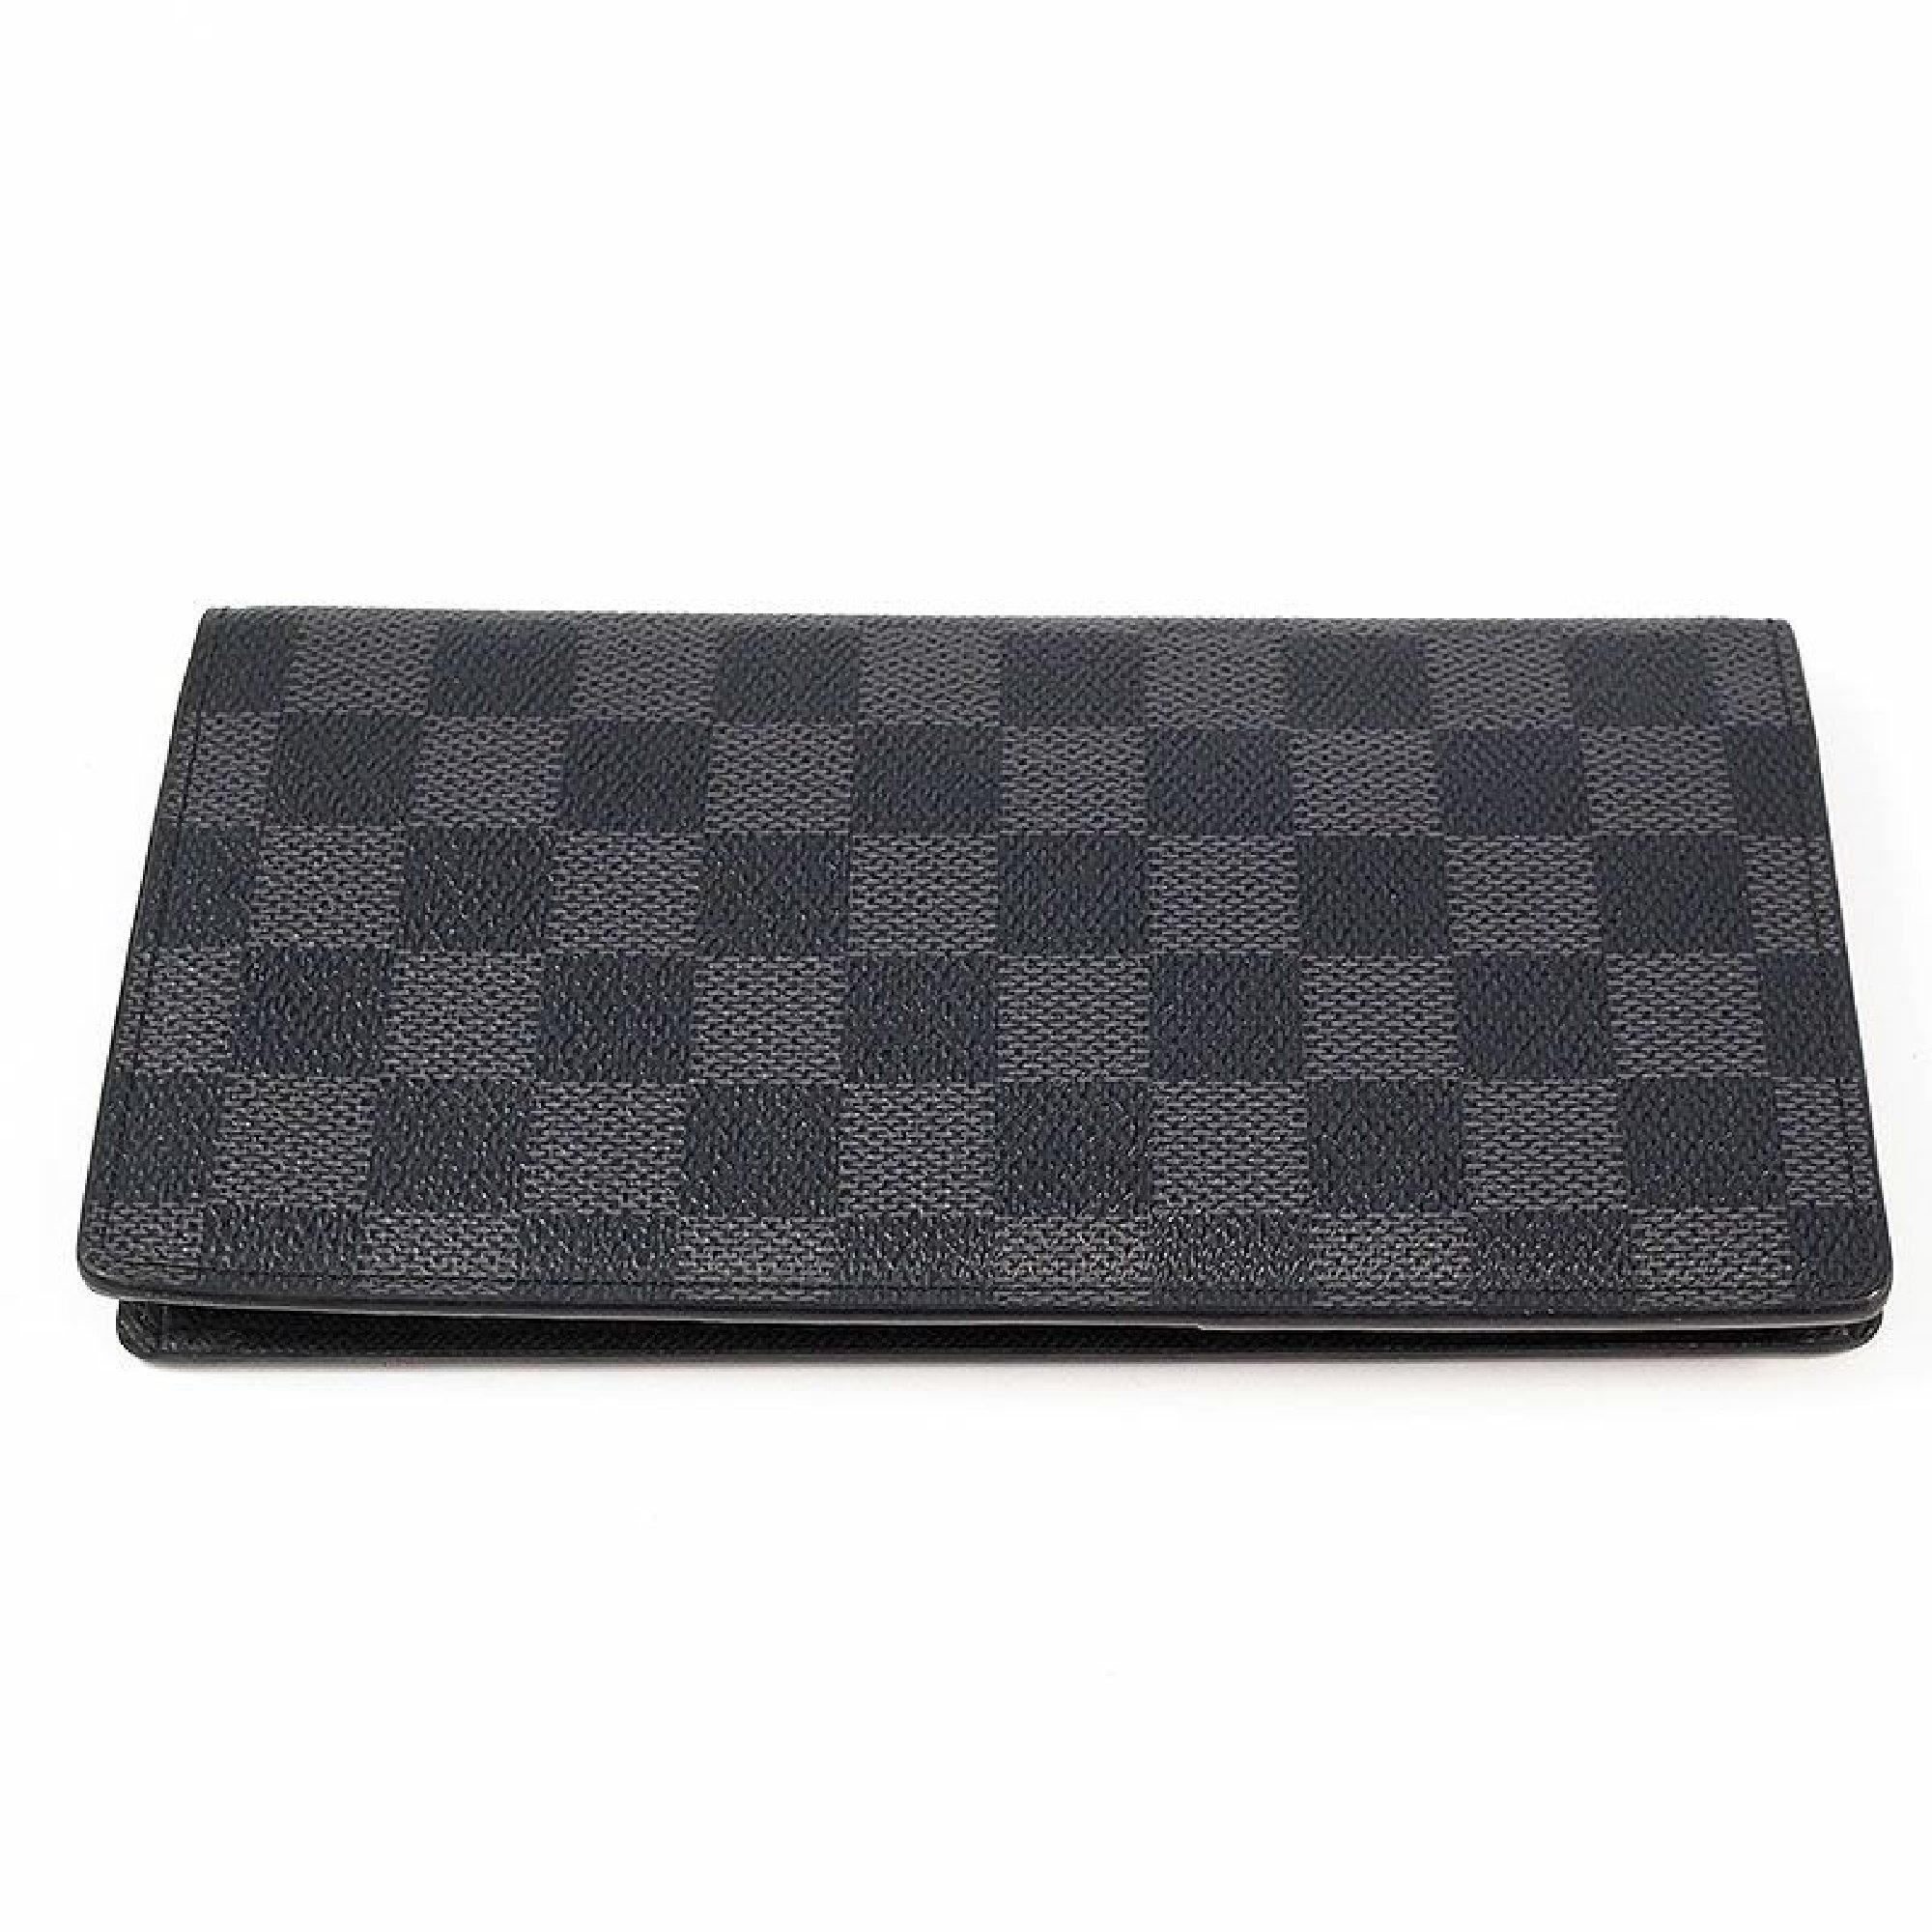 An authentic LOUIS VUITTON portofeuilles Brazza Mens long wallet N62665 gray. The color is Gray. The outside material is Damier graphite canvas. The pattern is portofeuilles  Brazza. This item is Contemporary. The year of manufacture would be